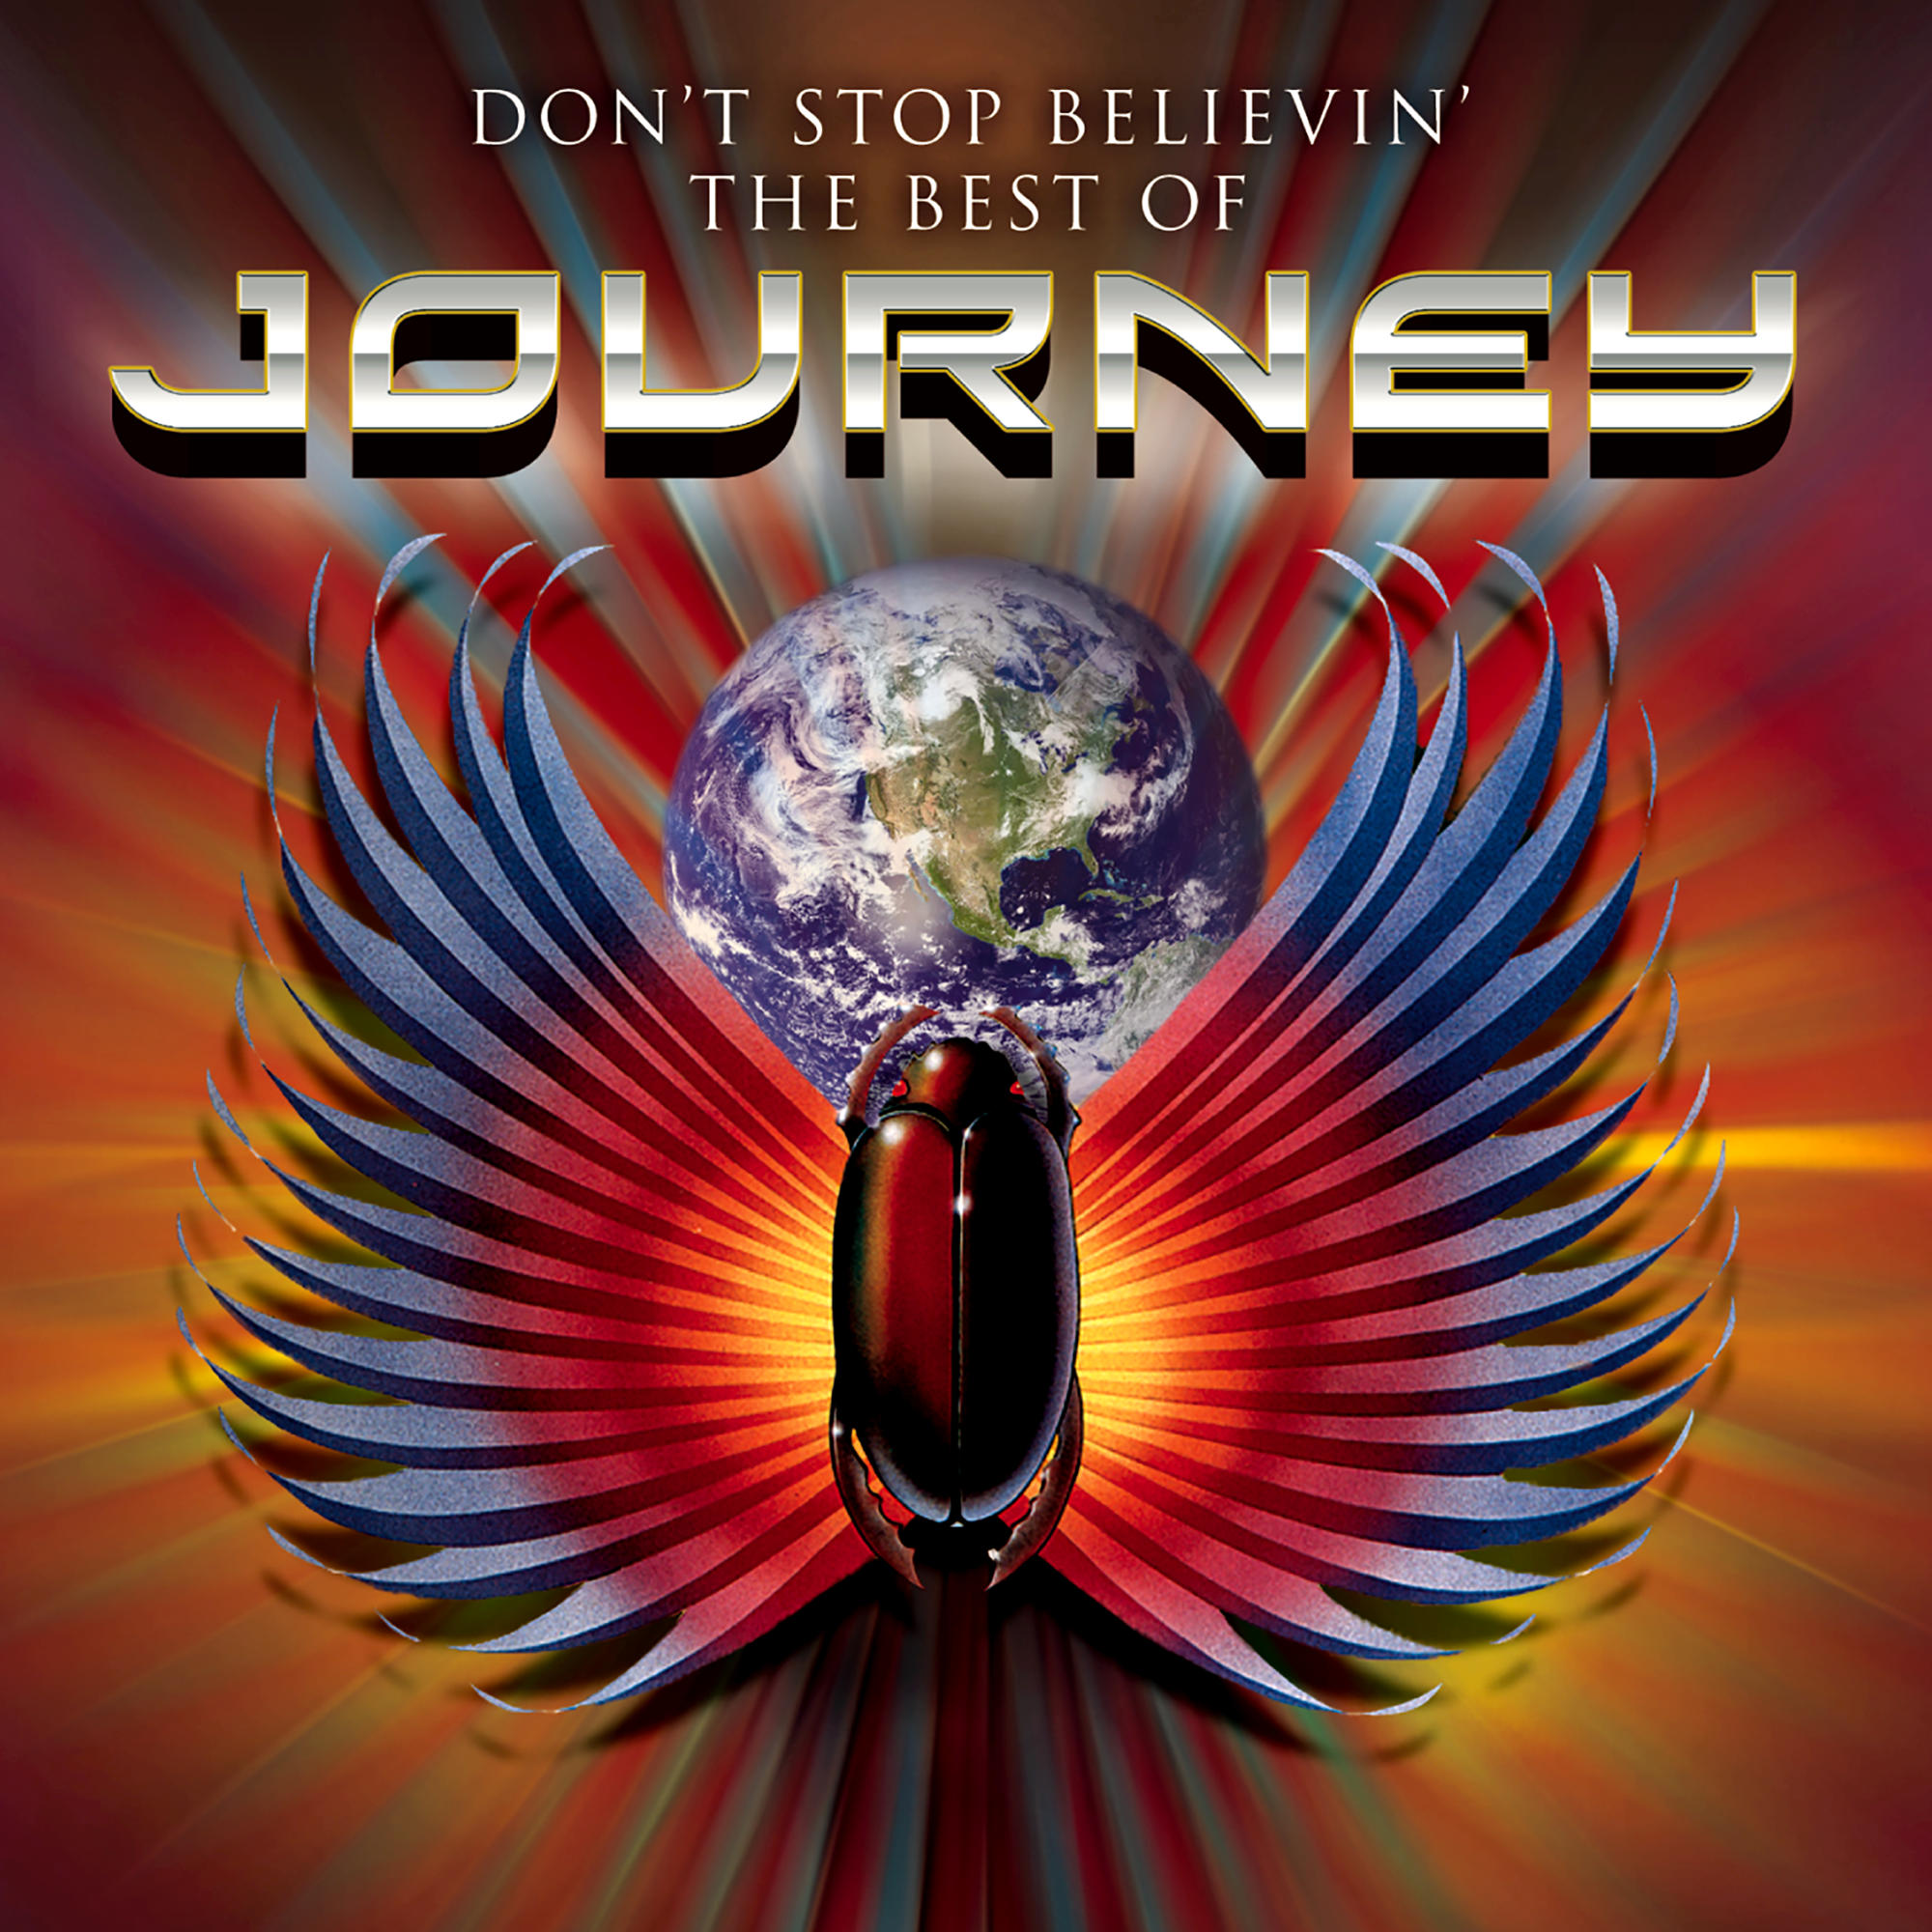 - - Journey Best Of Believin\': Stop Don\'t Journey The (CD)